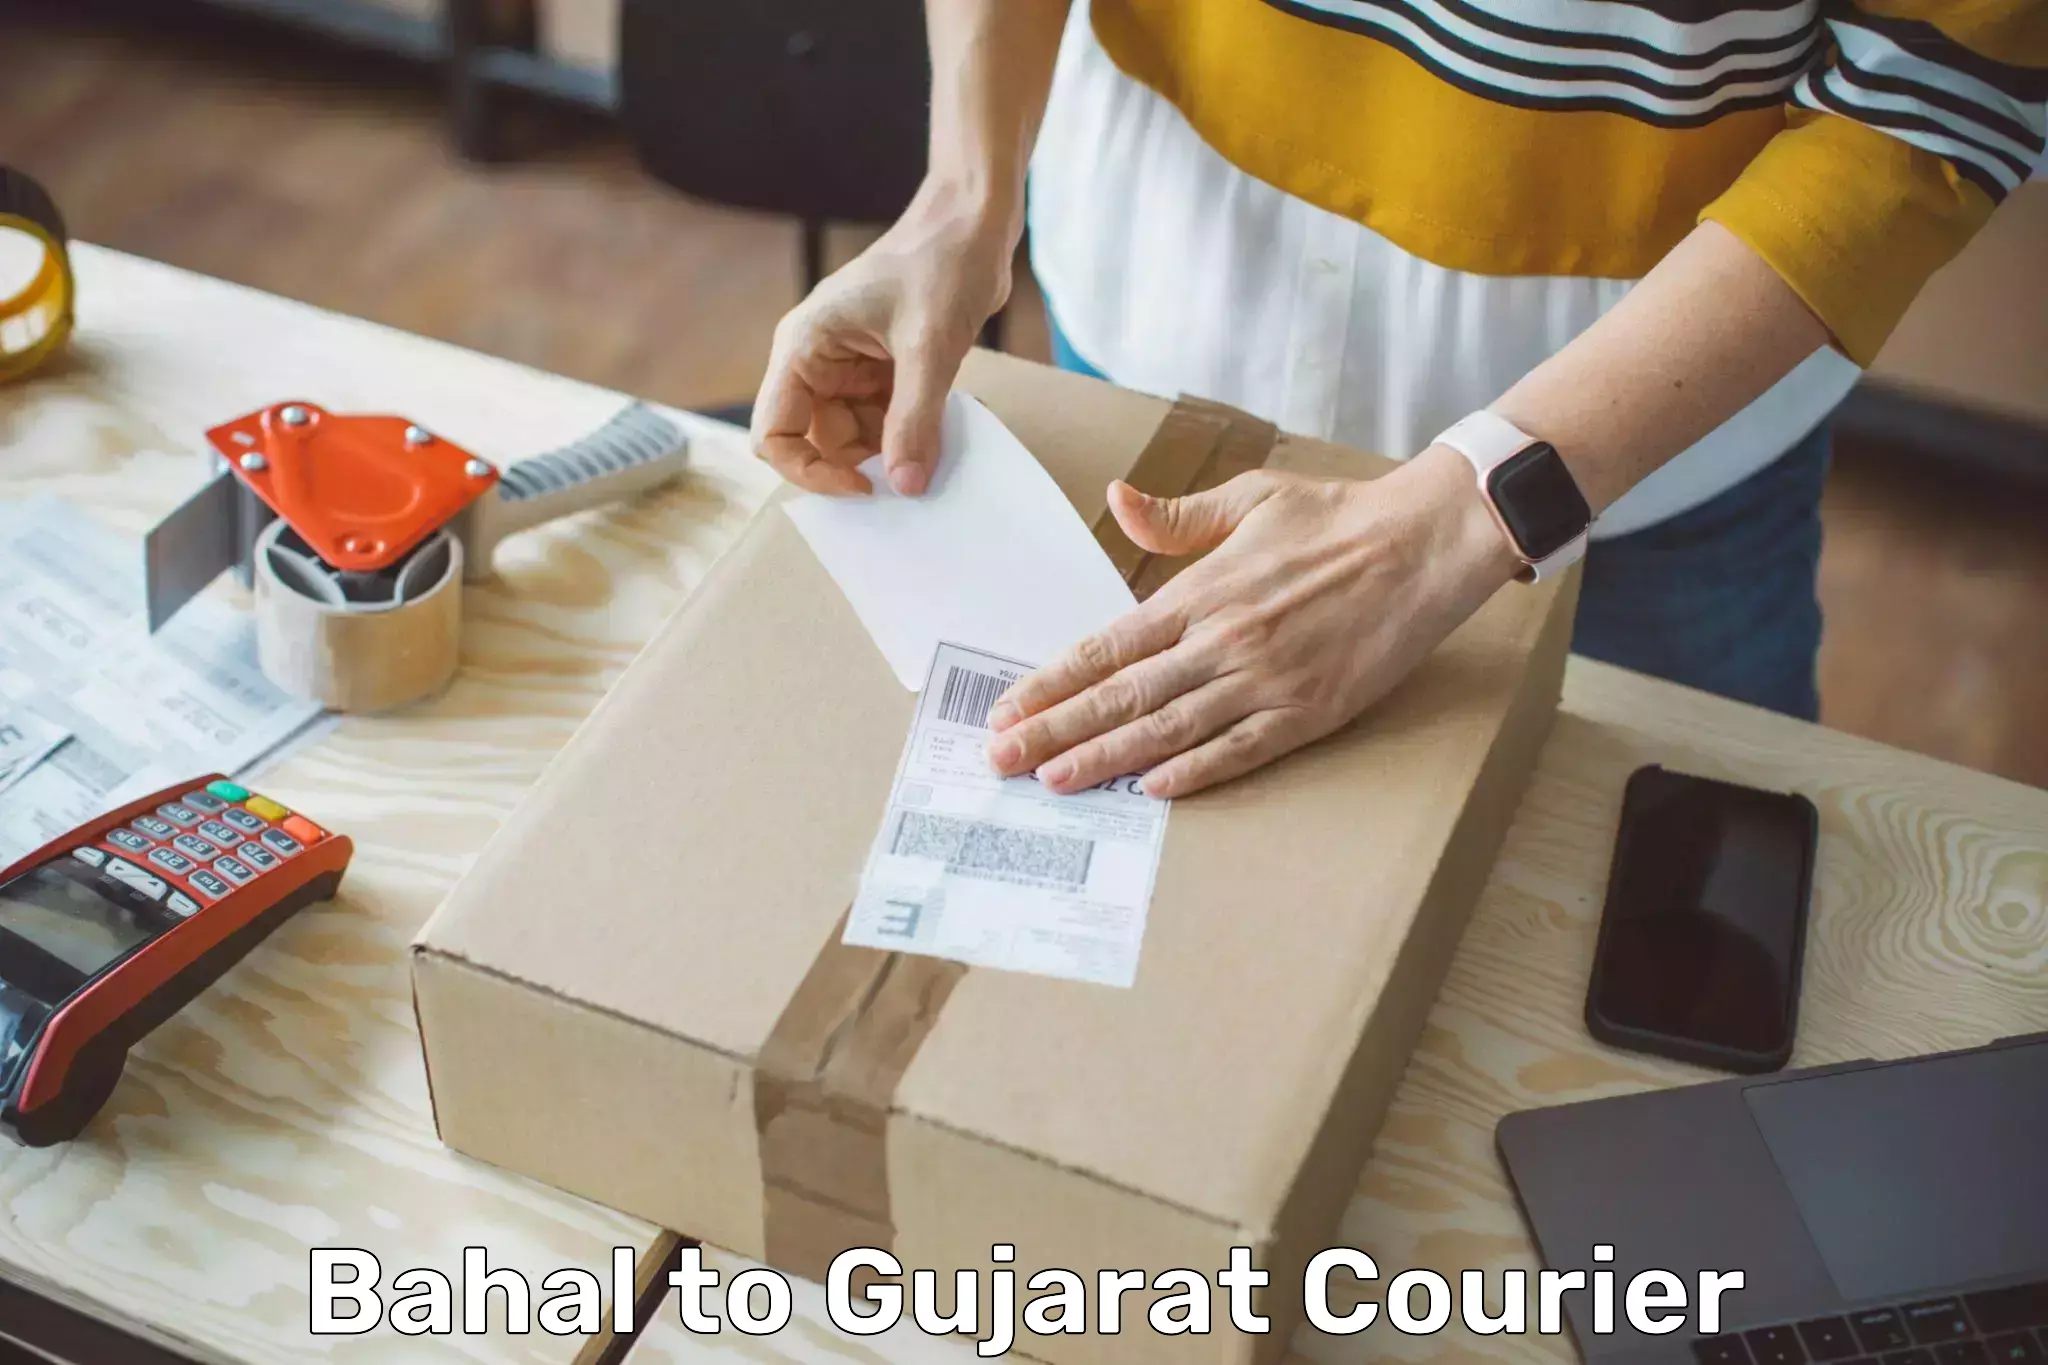 Global shipping solutions Bahal to Surat